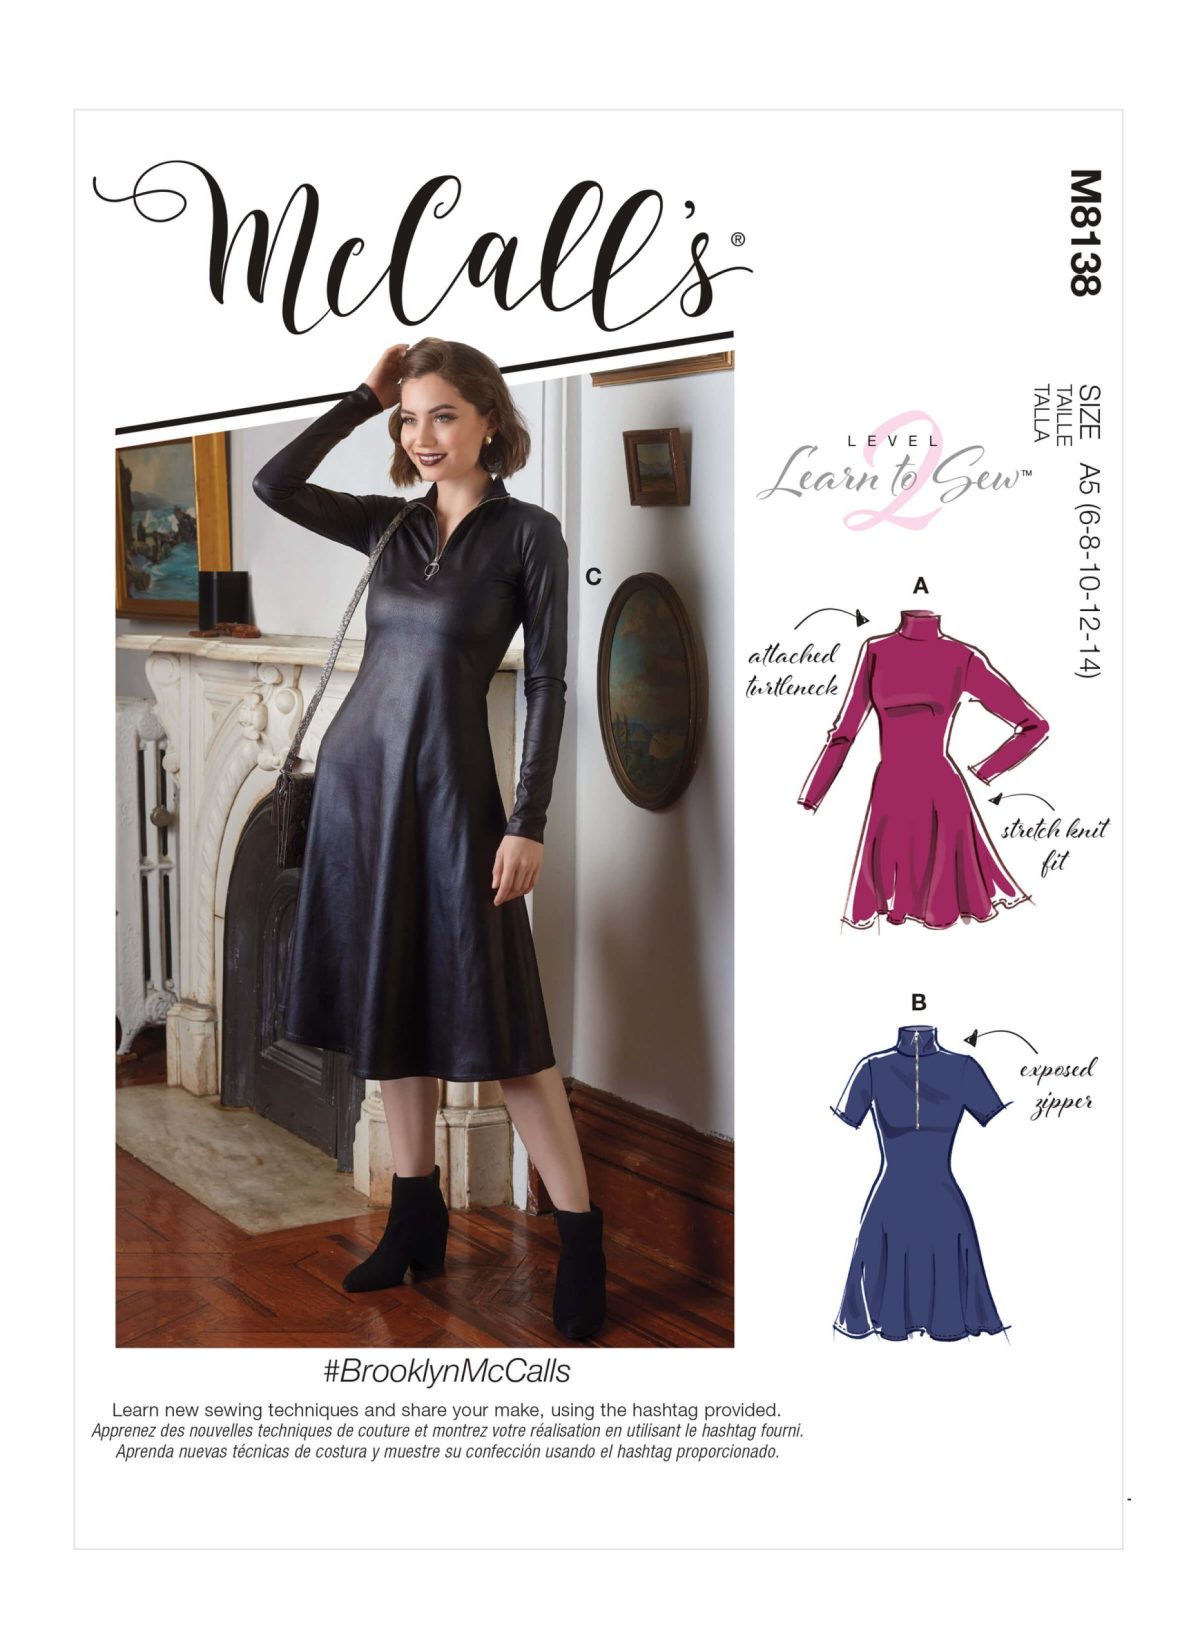 McCall's Sewing Pattern M8138 Misses' Dresses #Brooklyn McCalls Learn to Sew Level 2